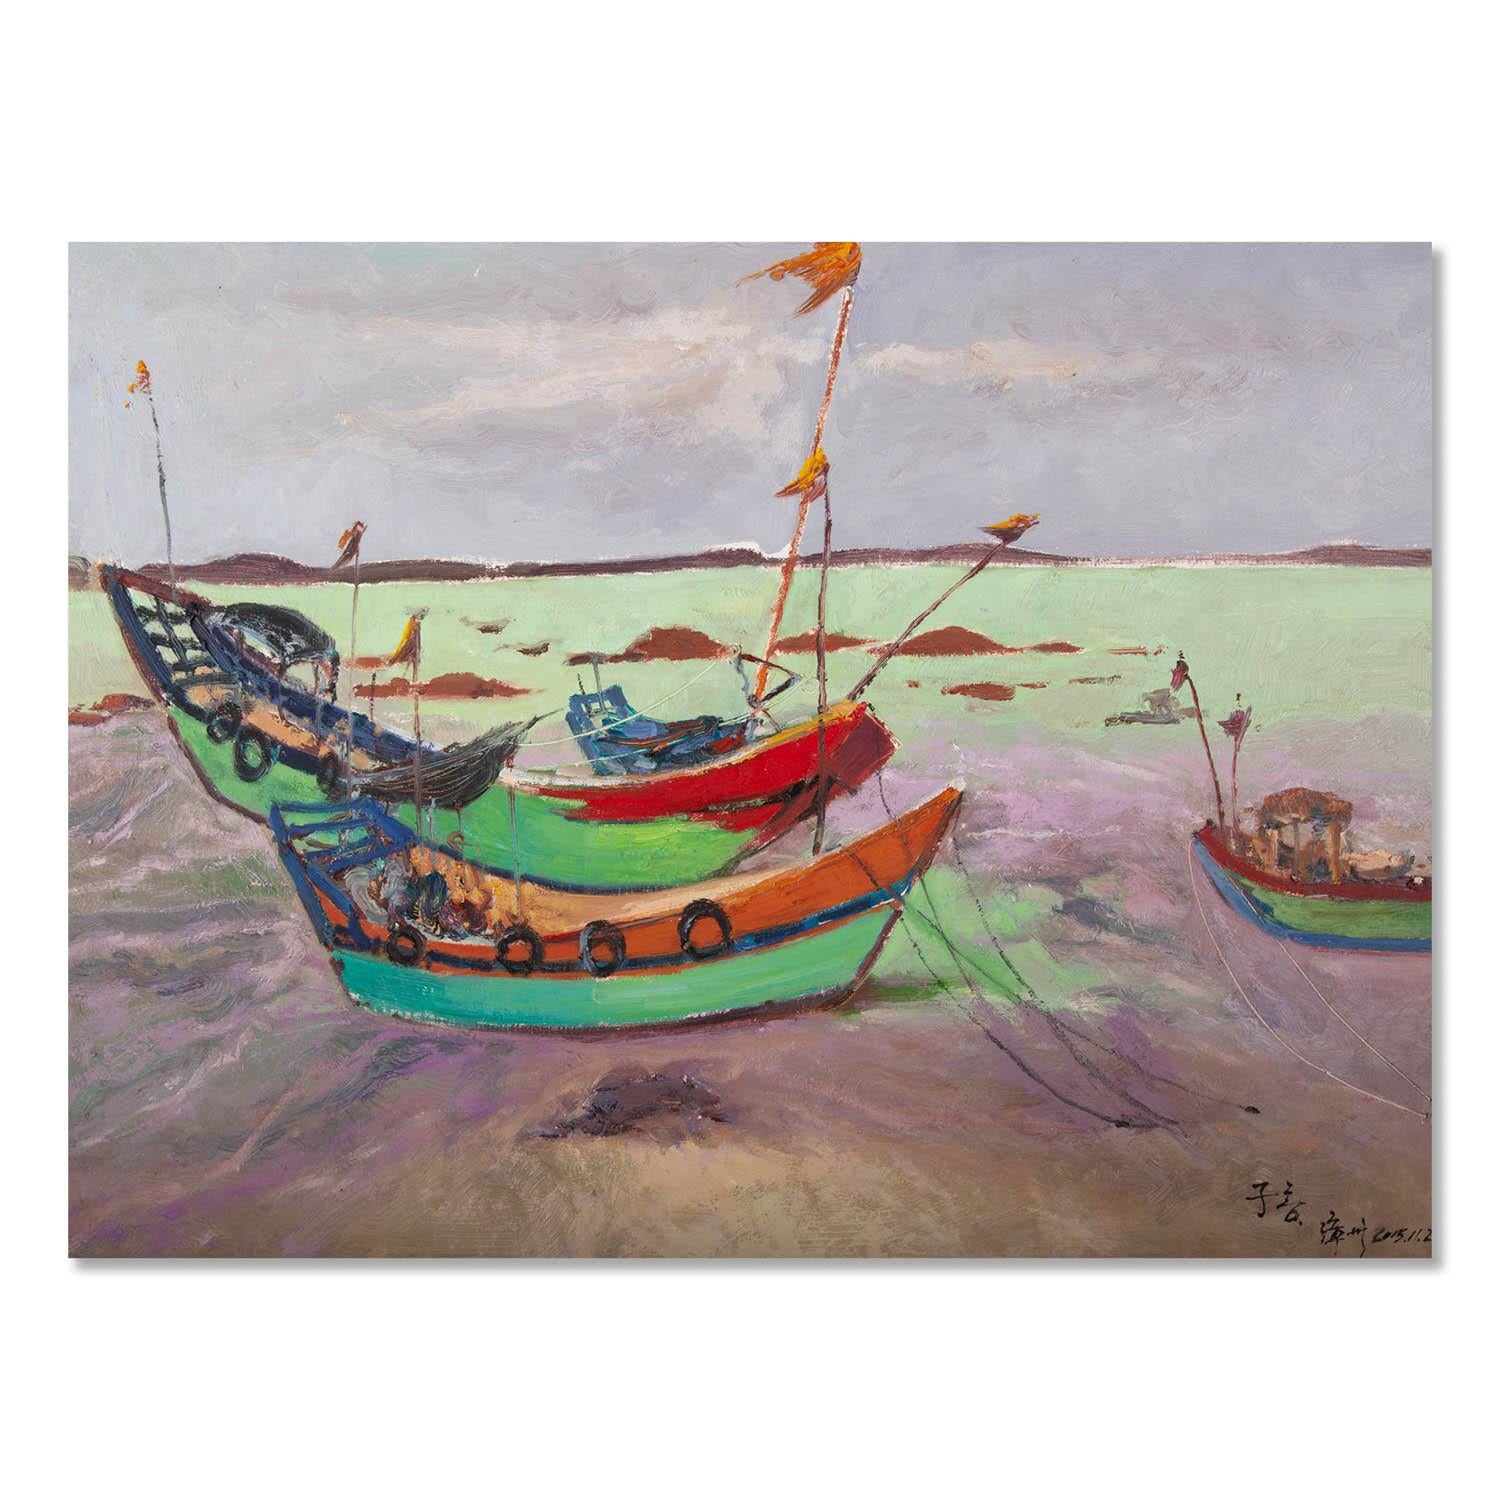  Title: Boats 1
 Medium: Oil on canvas
 Size: 22 x 29 inches
 Frame: Framing options available!
 Condition: The painting appears to be in excellent condition.
 
 Year: 2015
 Artist: XinSheng Zhuang
 Signature: Signed
 Signature Location: Lower